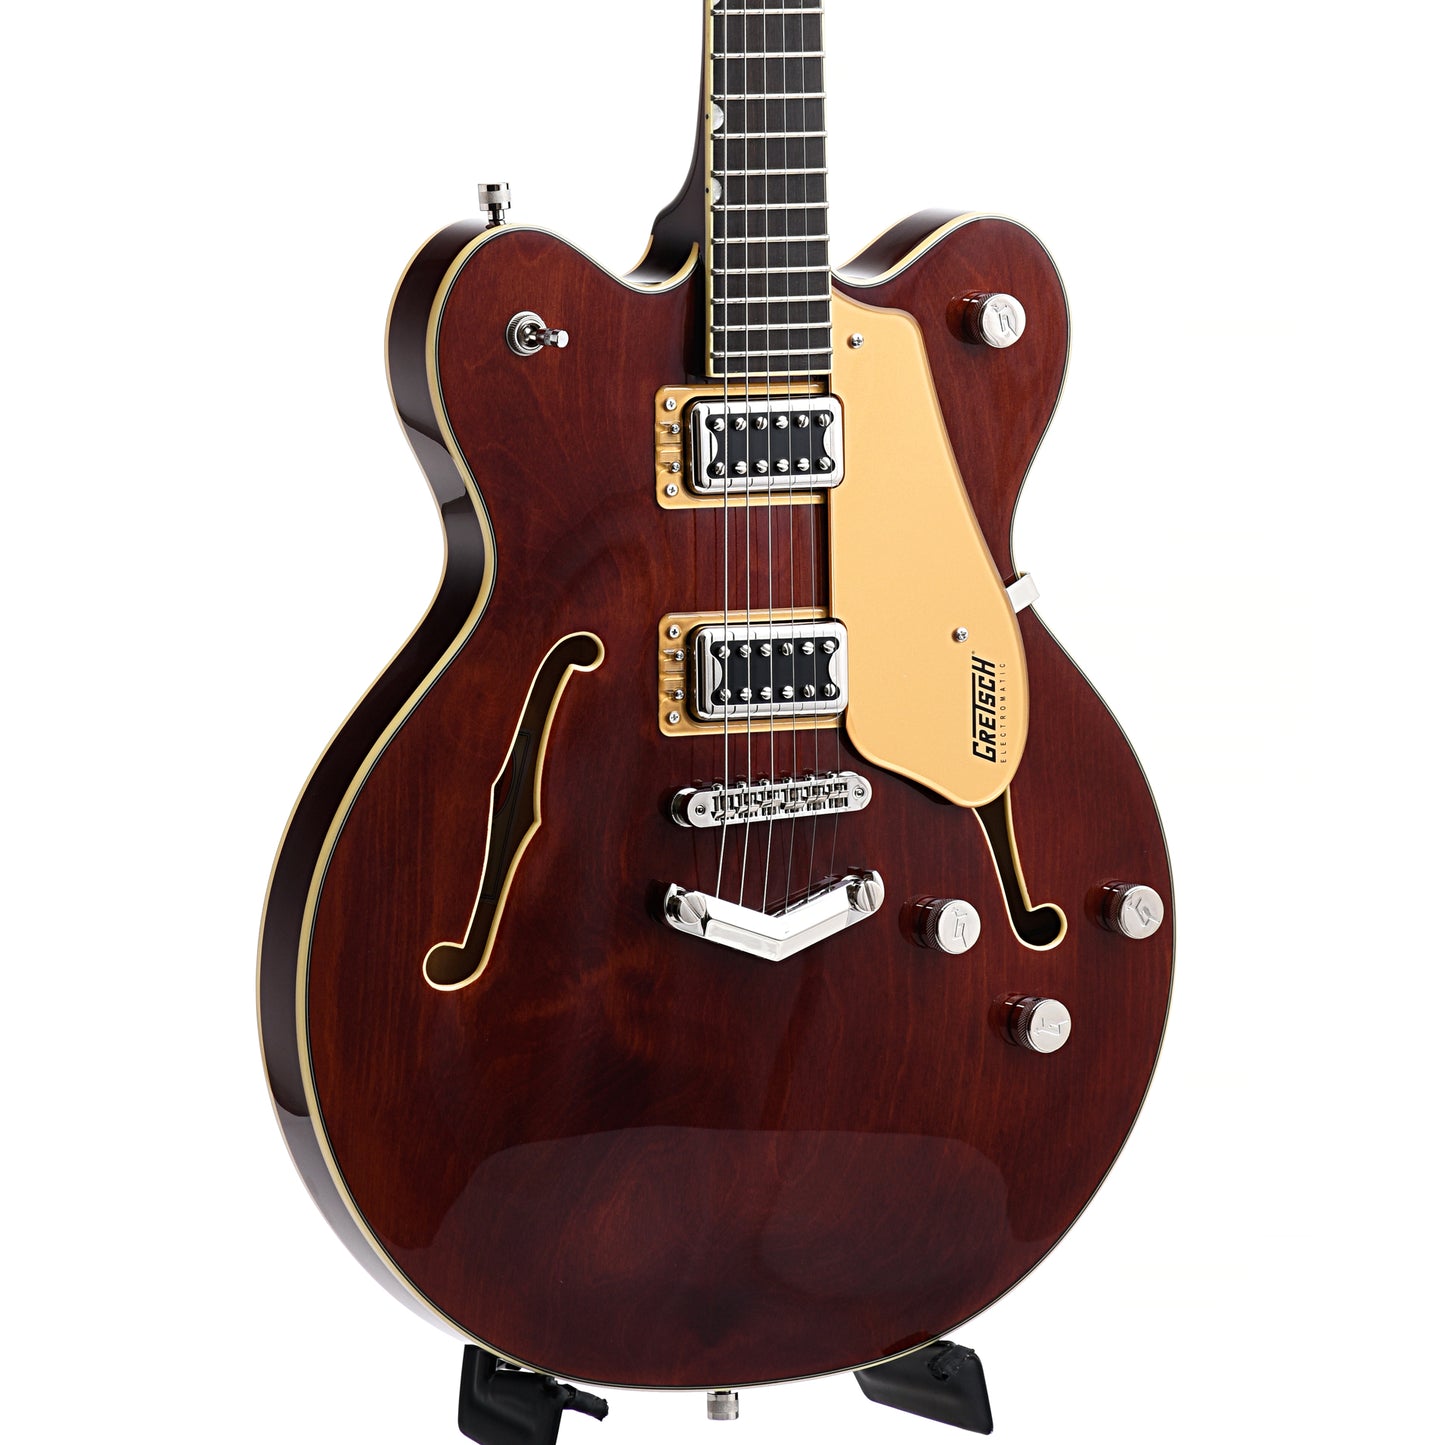 Image 3 of Gretsch G5622 Electromatic Center Block Double Cut with V-Stoptail, Aged Walnut - SKU# G5622-AW : Product Type Hollow Body Electric Guitars : Elderly Instruments